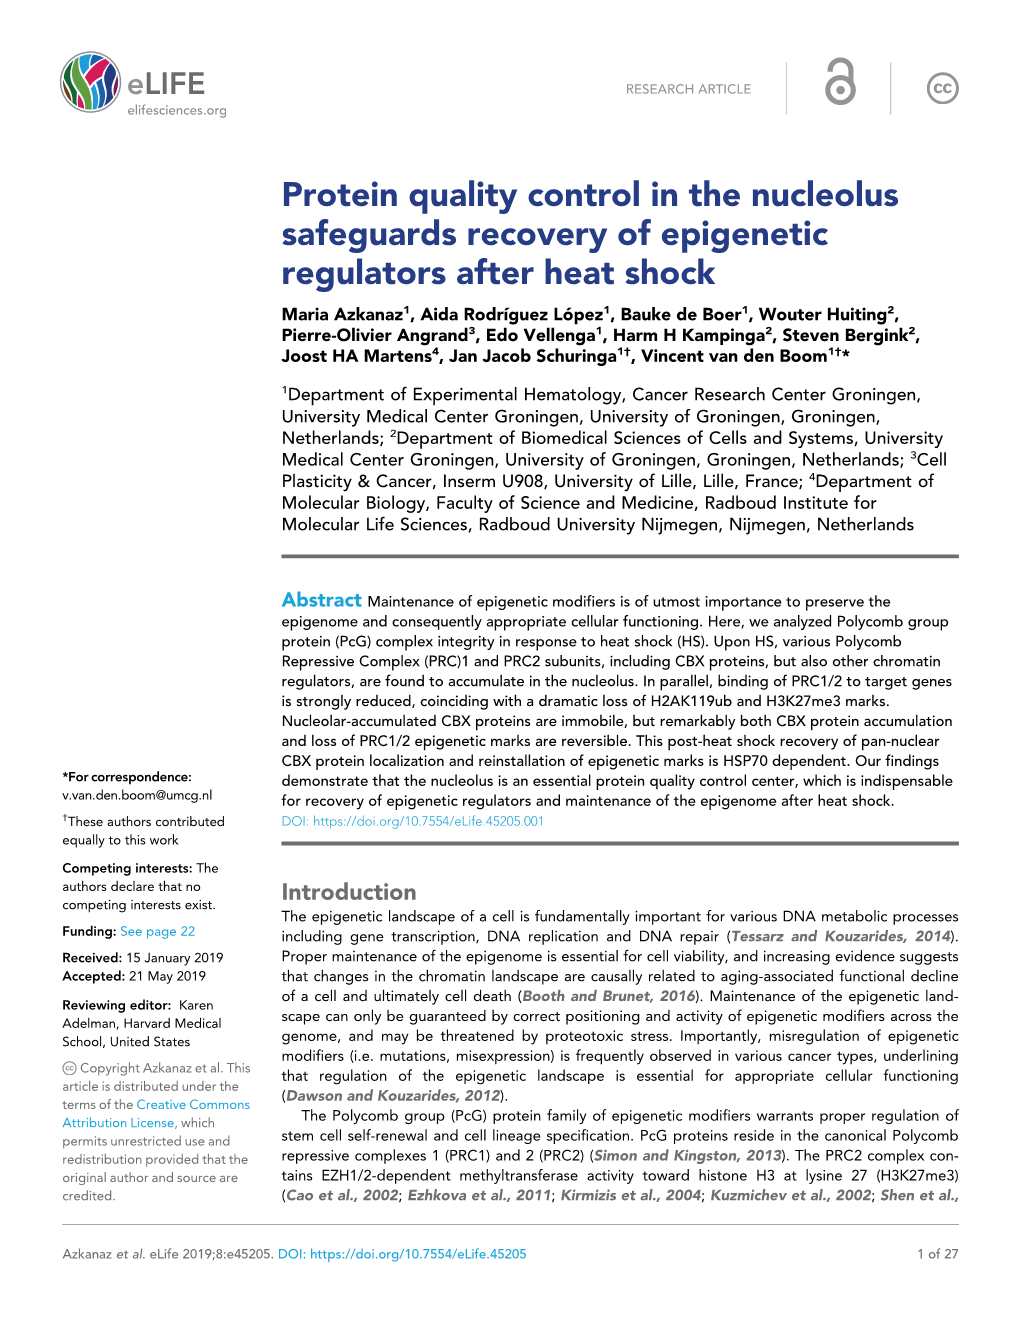 Protein Quality Control in the Nucleolus Safeguards Recovery of Epigenetic